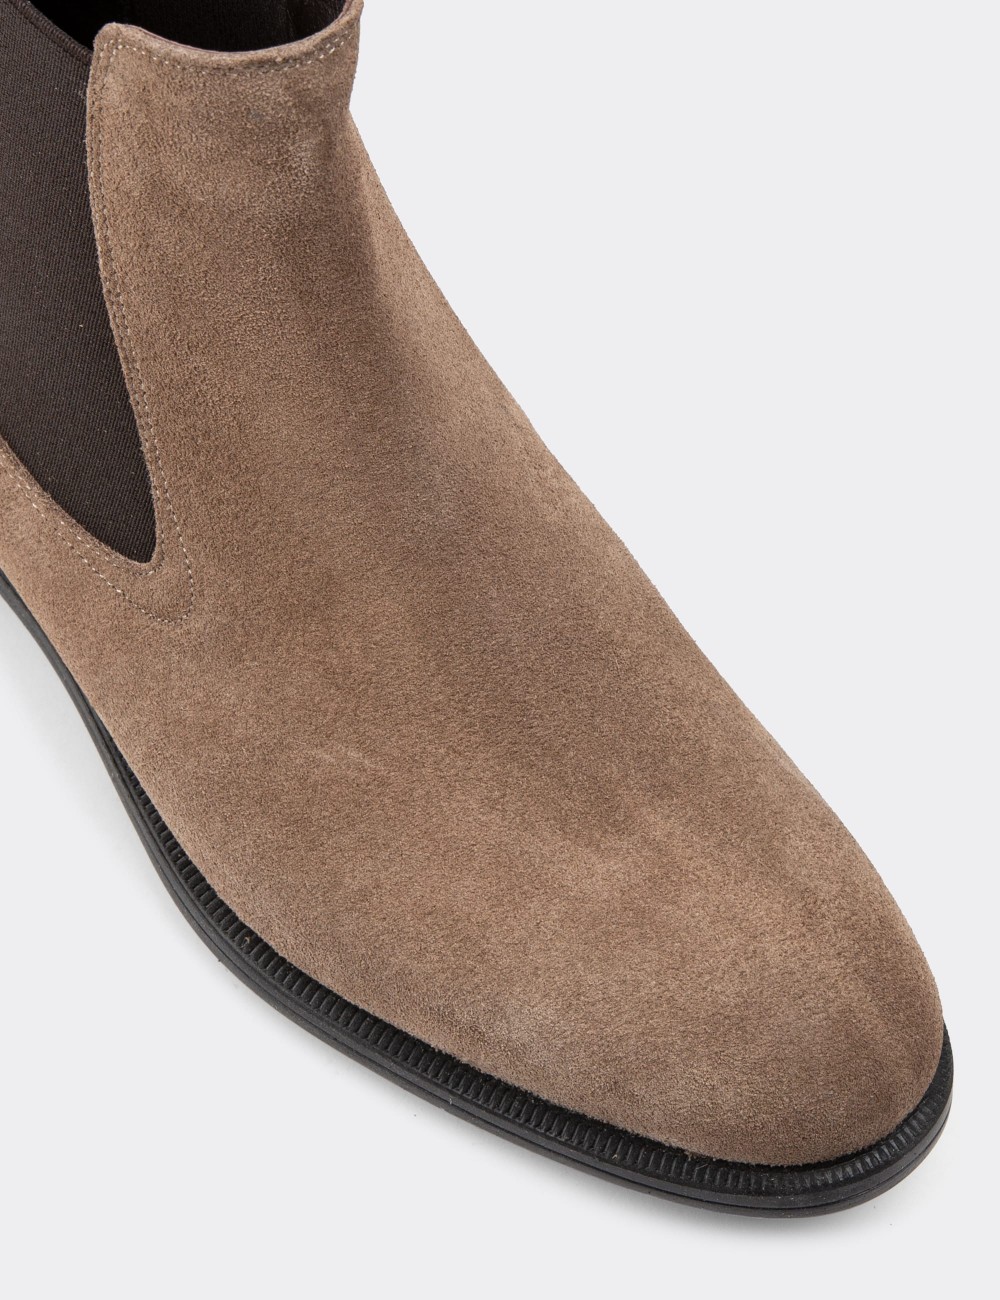 Sandstone Suede Leather Boots - 01919MVZNC01